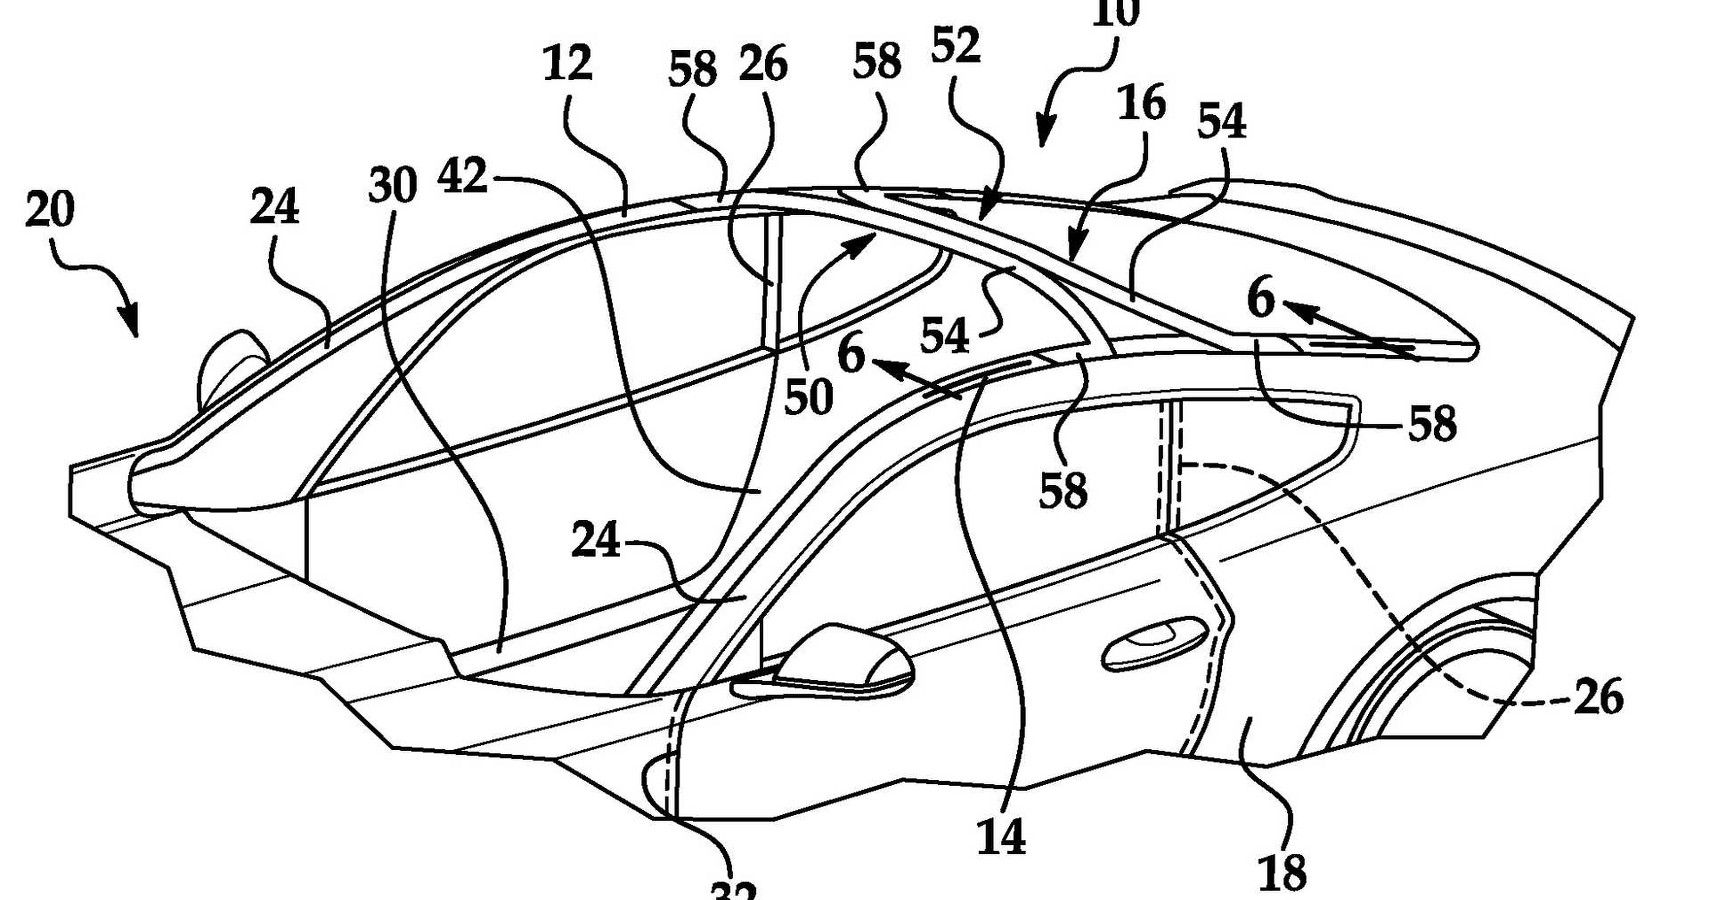 The Ford windshield patent shows 'roof bow' strengthening